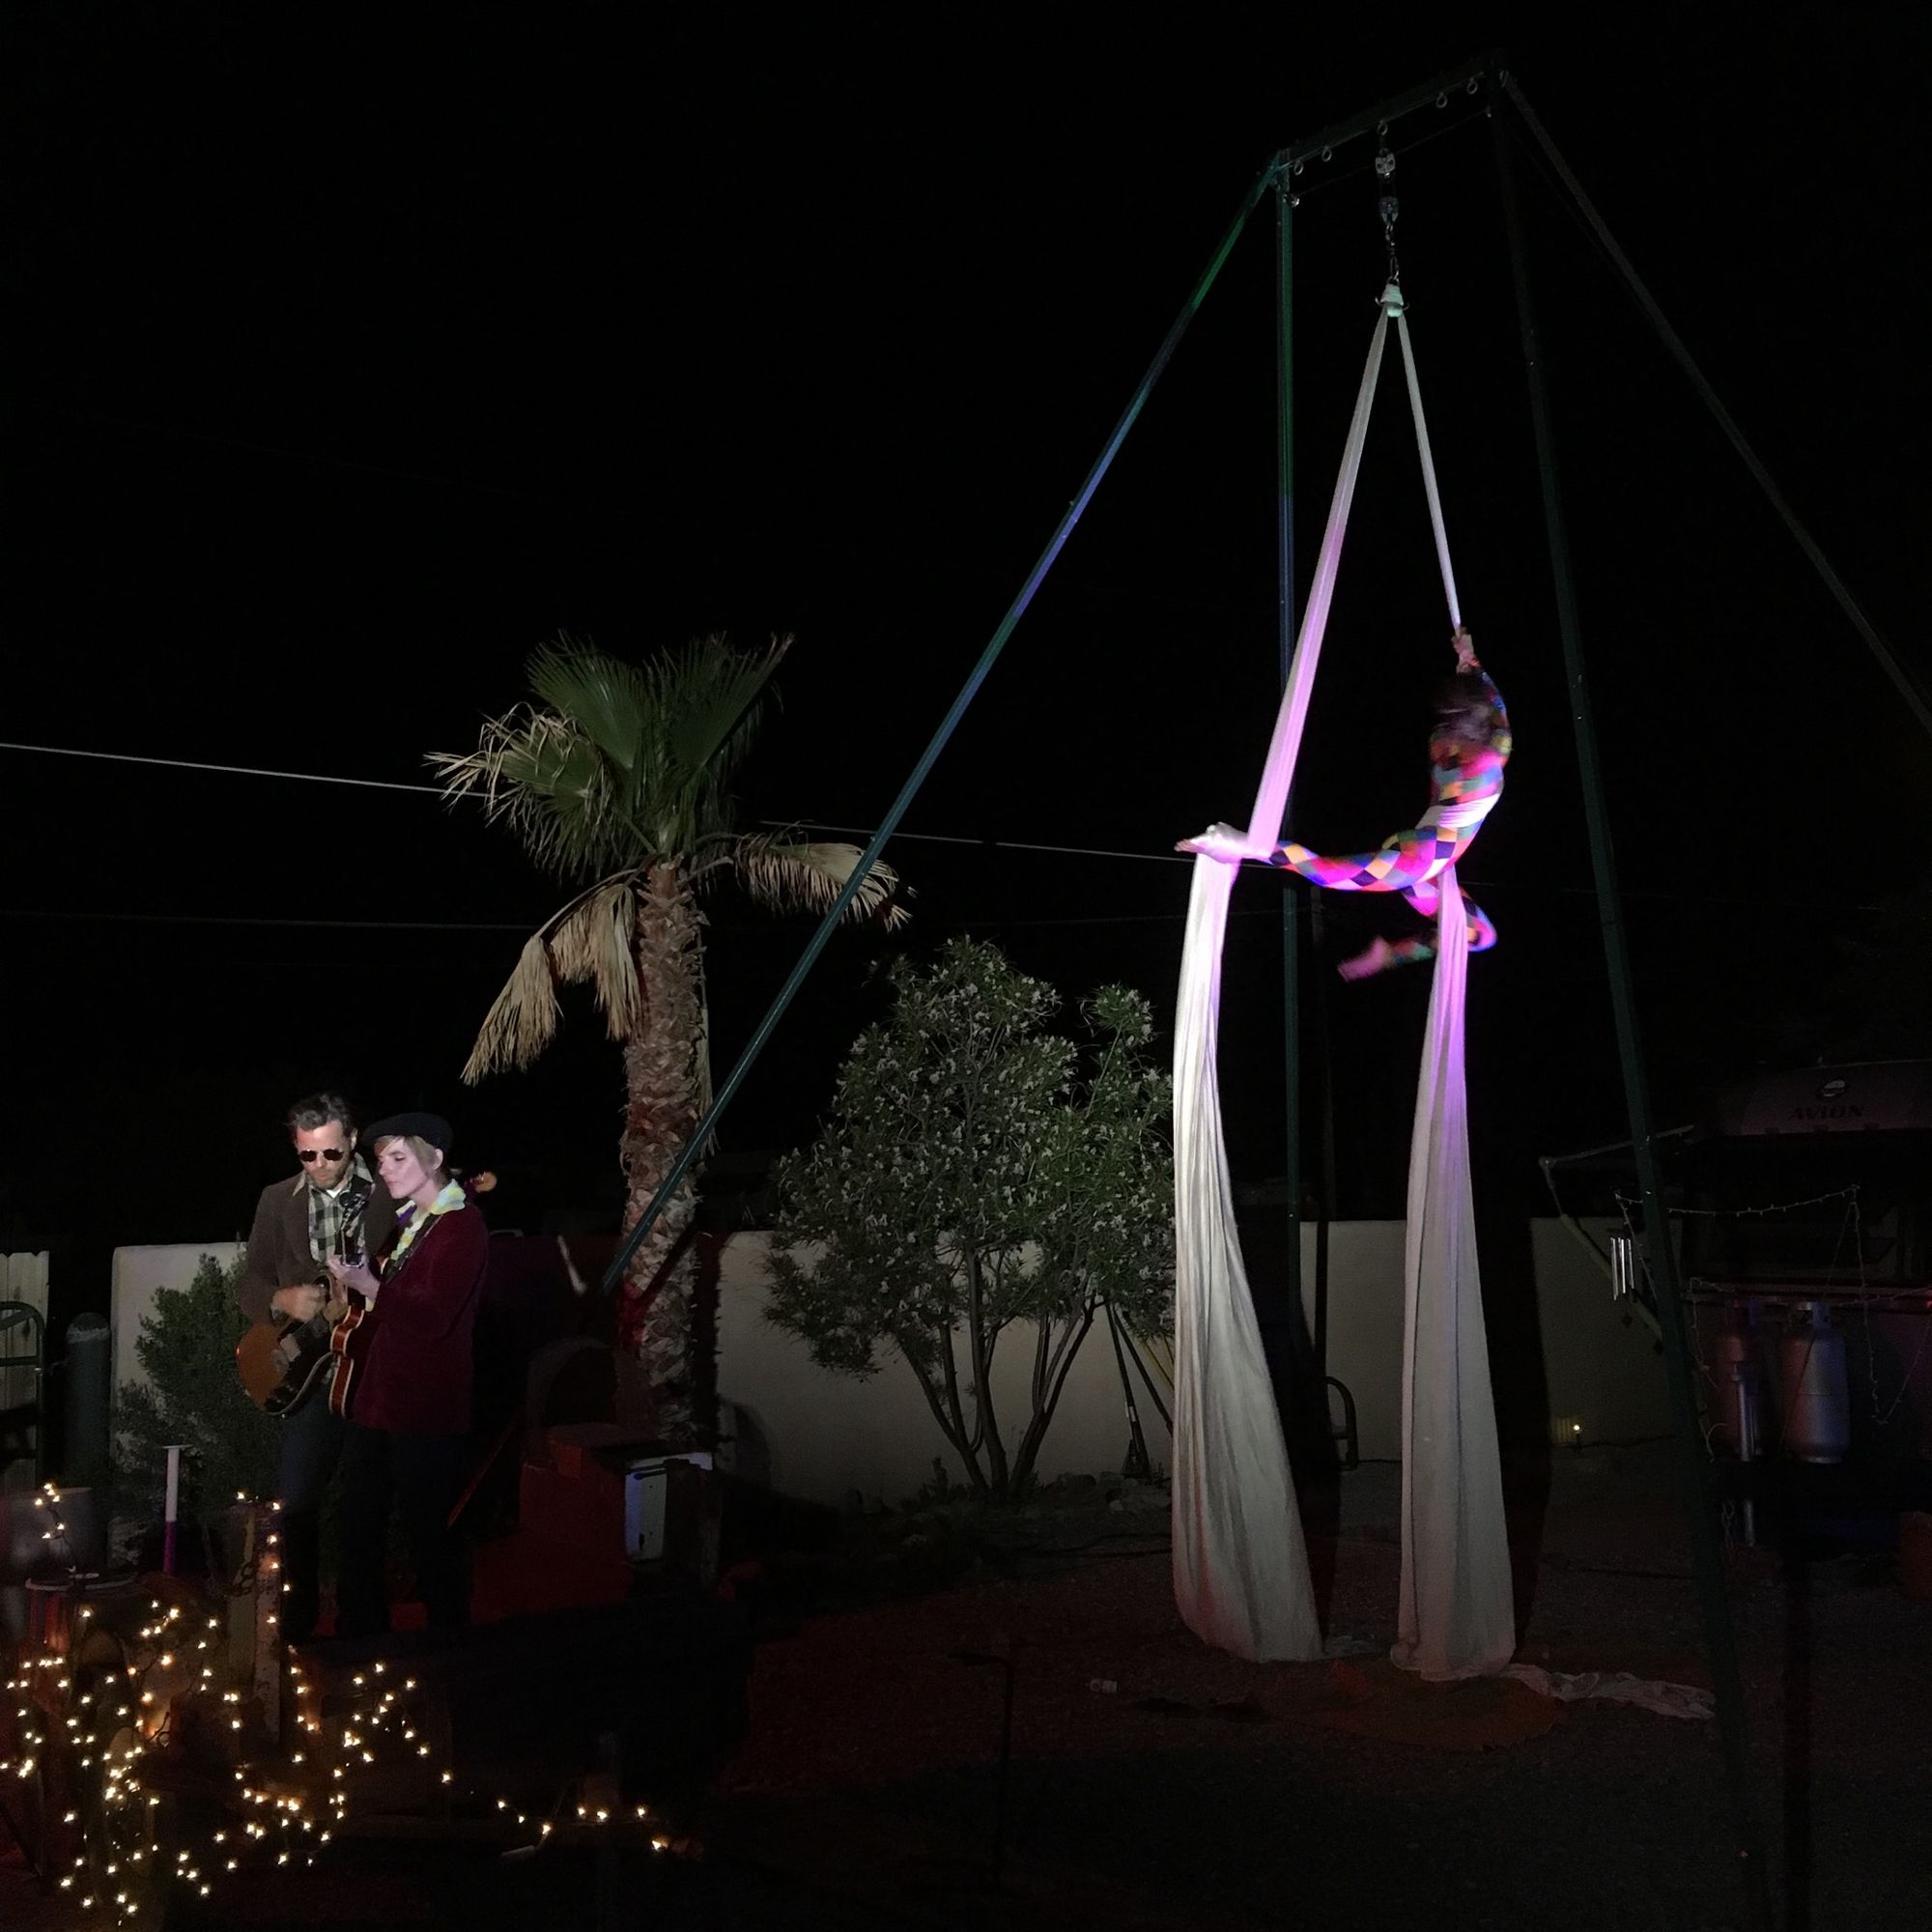 Woman wearing multicolored harlequin costume doing aerial acrobatics at night while two people play music in front.